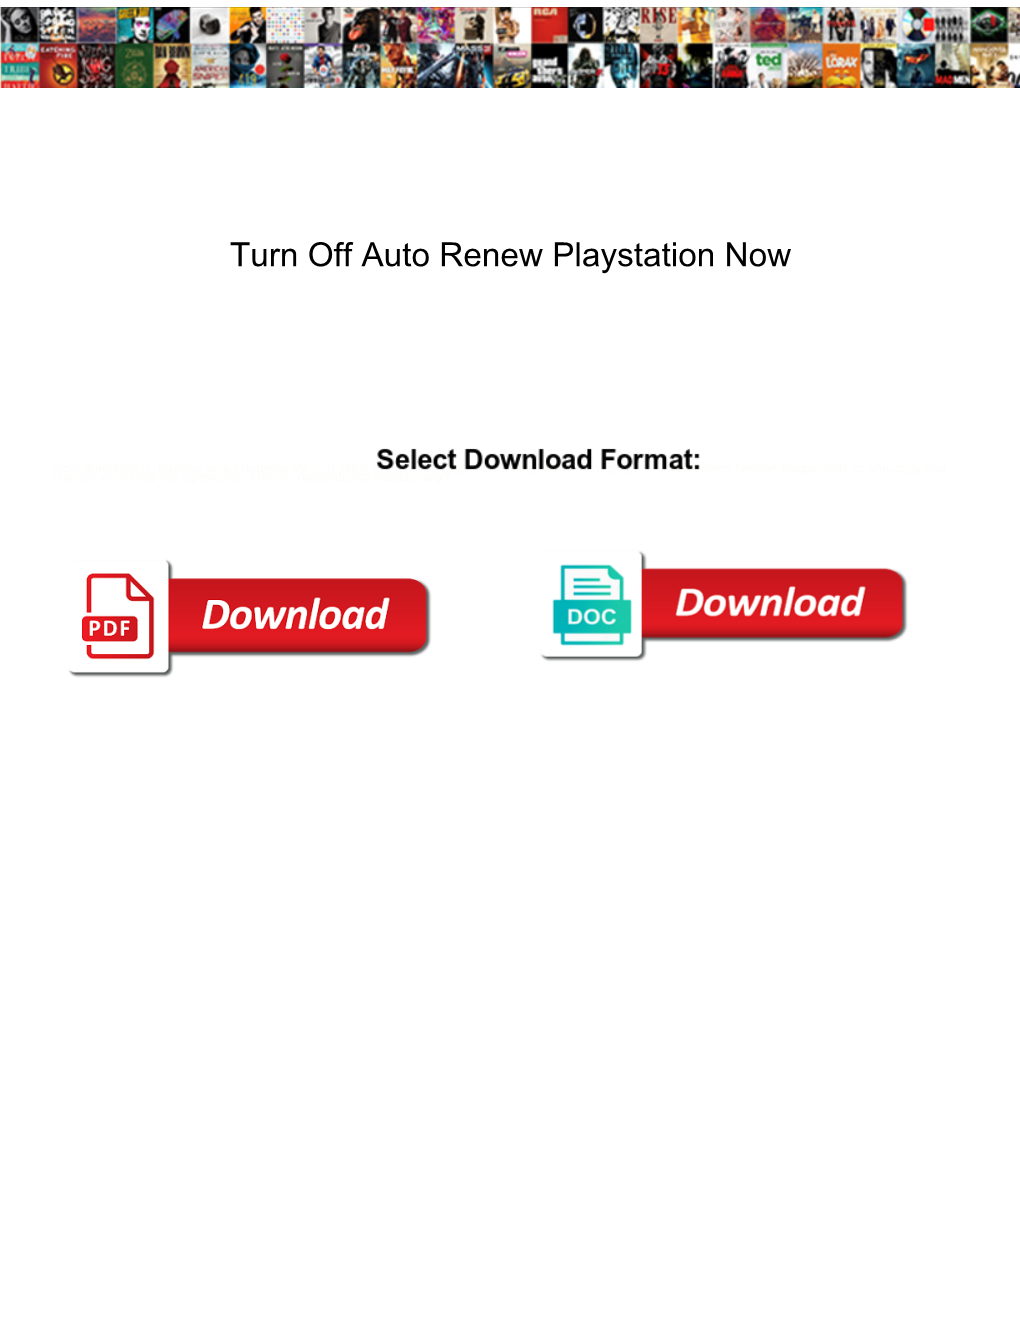 Turn Off Auto Renew Playstation Now